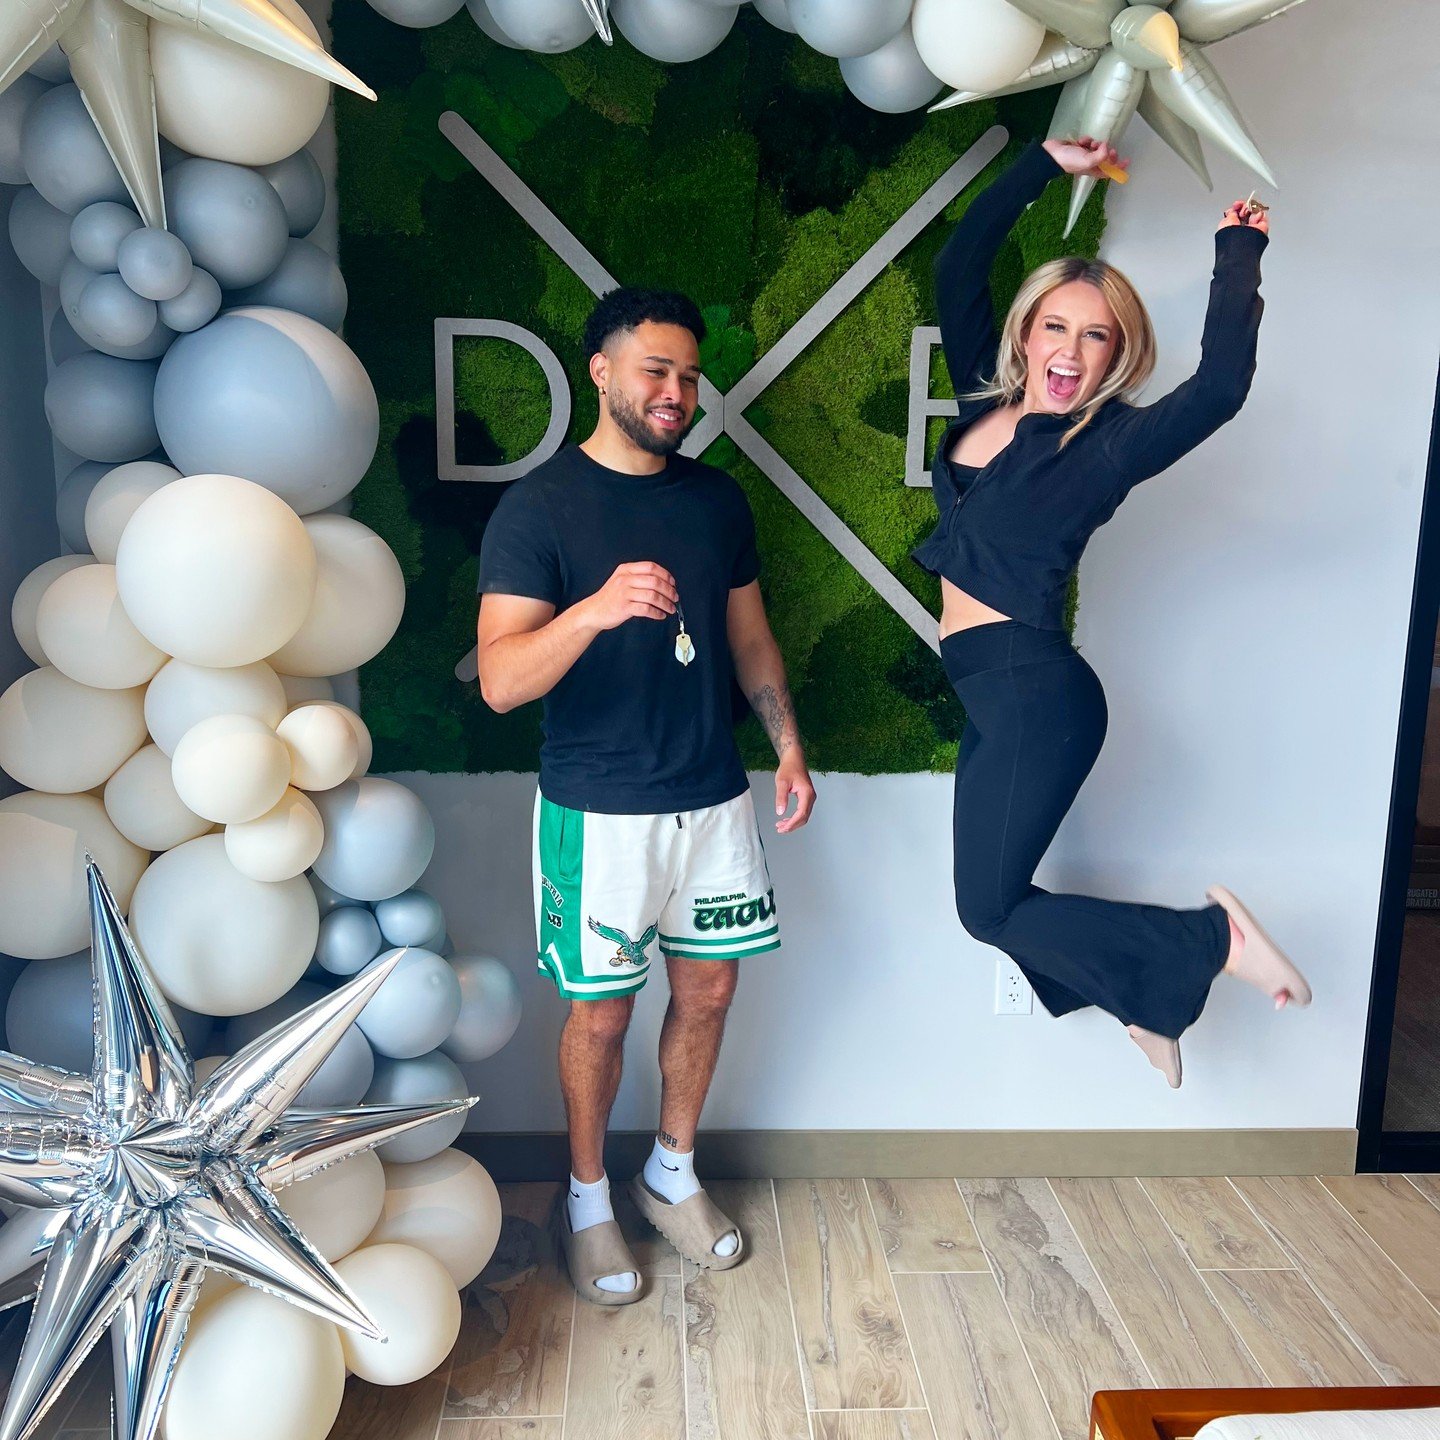 That move-in day feeling 🎉 Excited to extend a warm welcome to all our new residents at The Darby! Today we celebrated 7 move ins and can't wait for many more to join our community. 💚

🔑- Secure your spot with us today, and this could be you! 
#ho